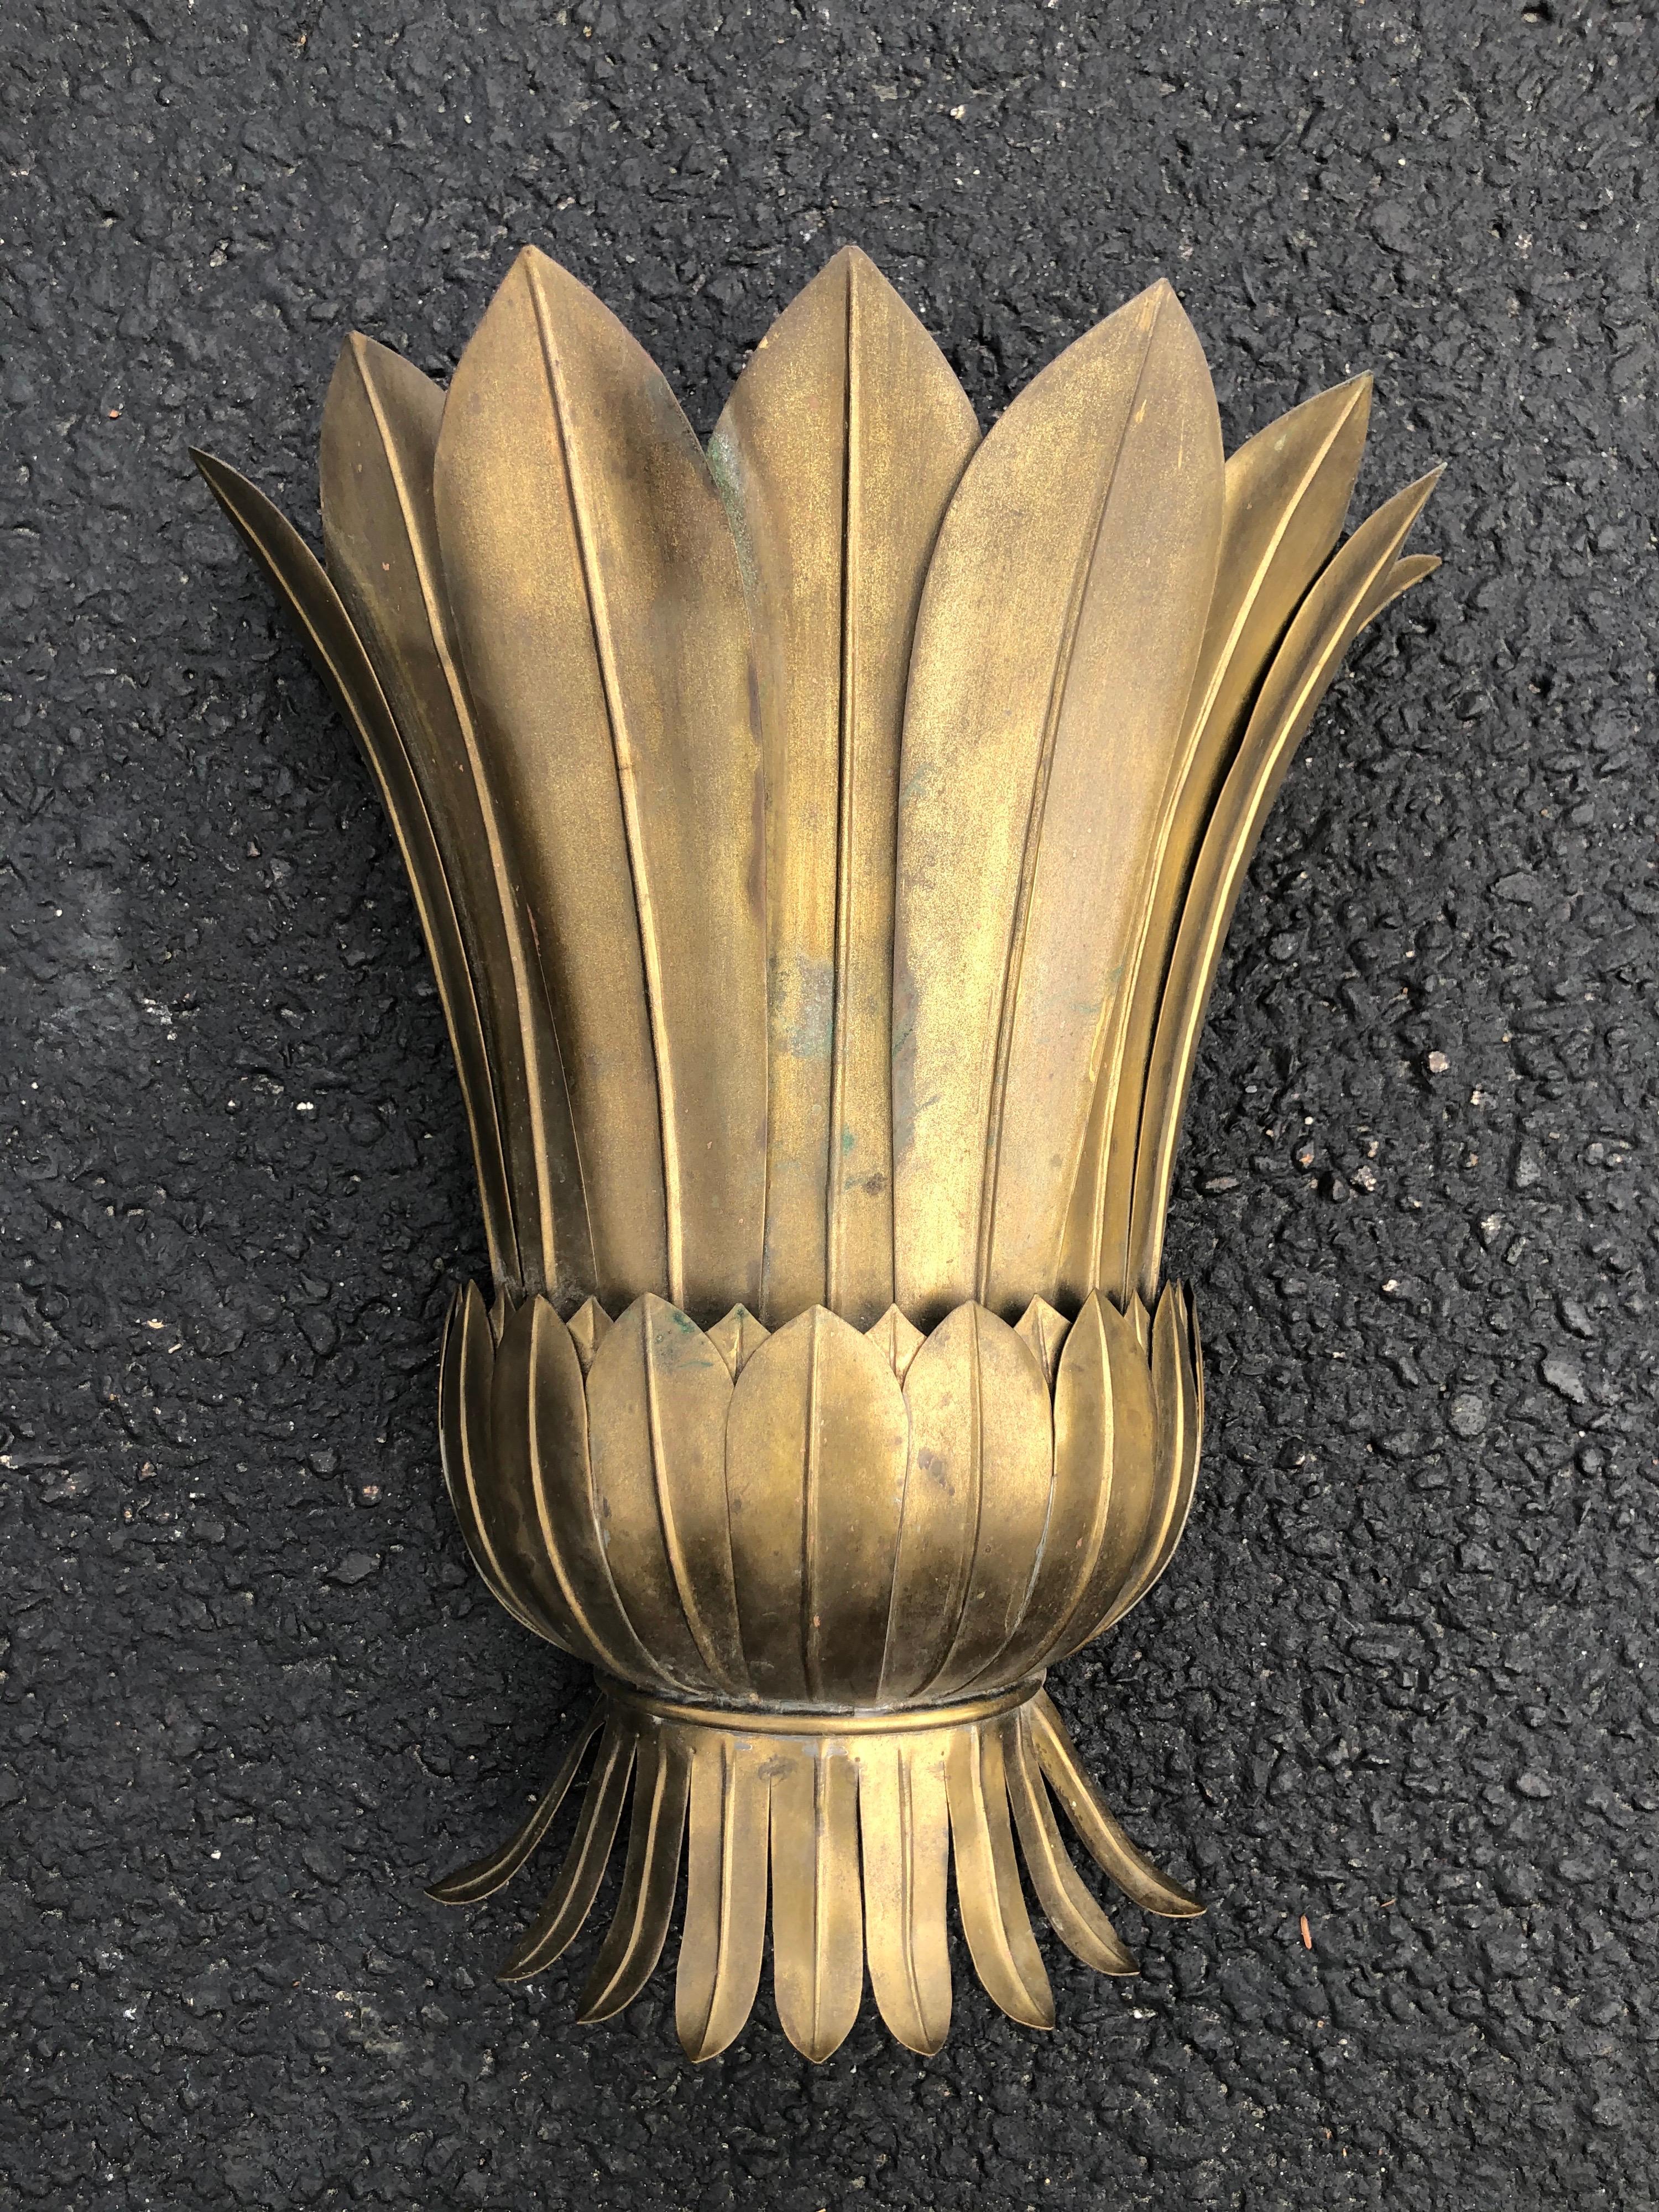 Art Deco French Metal flower leaf wall sconce. Classic Art Deco and Hollywood Regency style sconce. Needs new rewiring. This item ships parcel for $29 in the continental US.